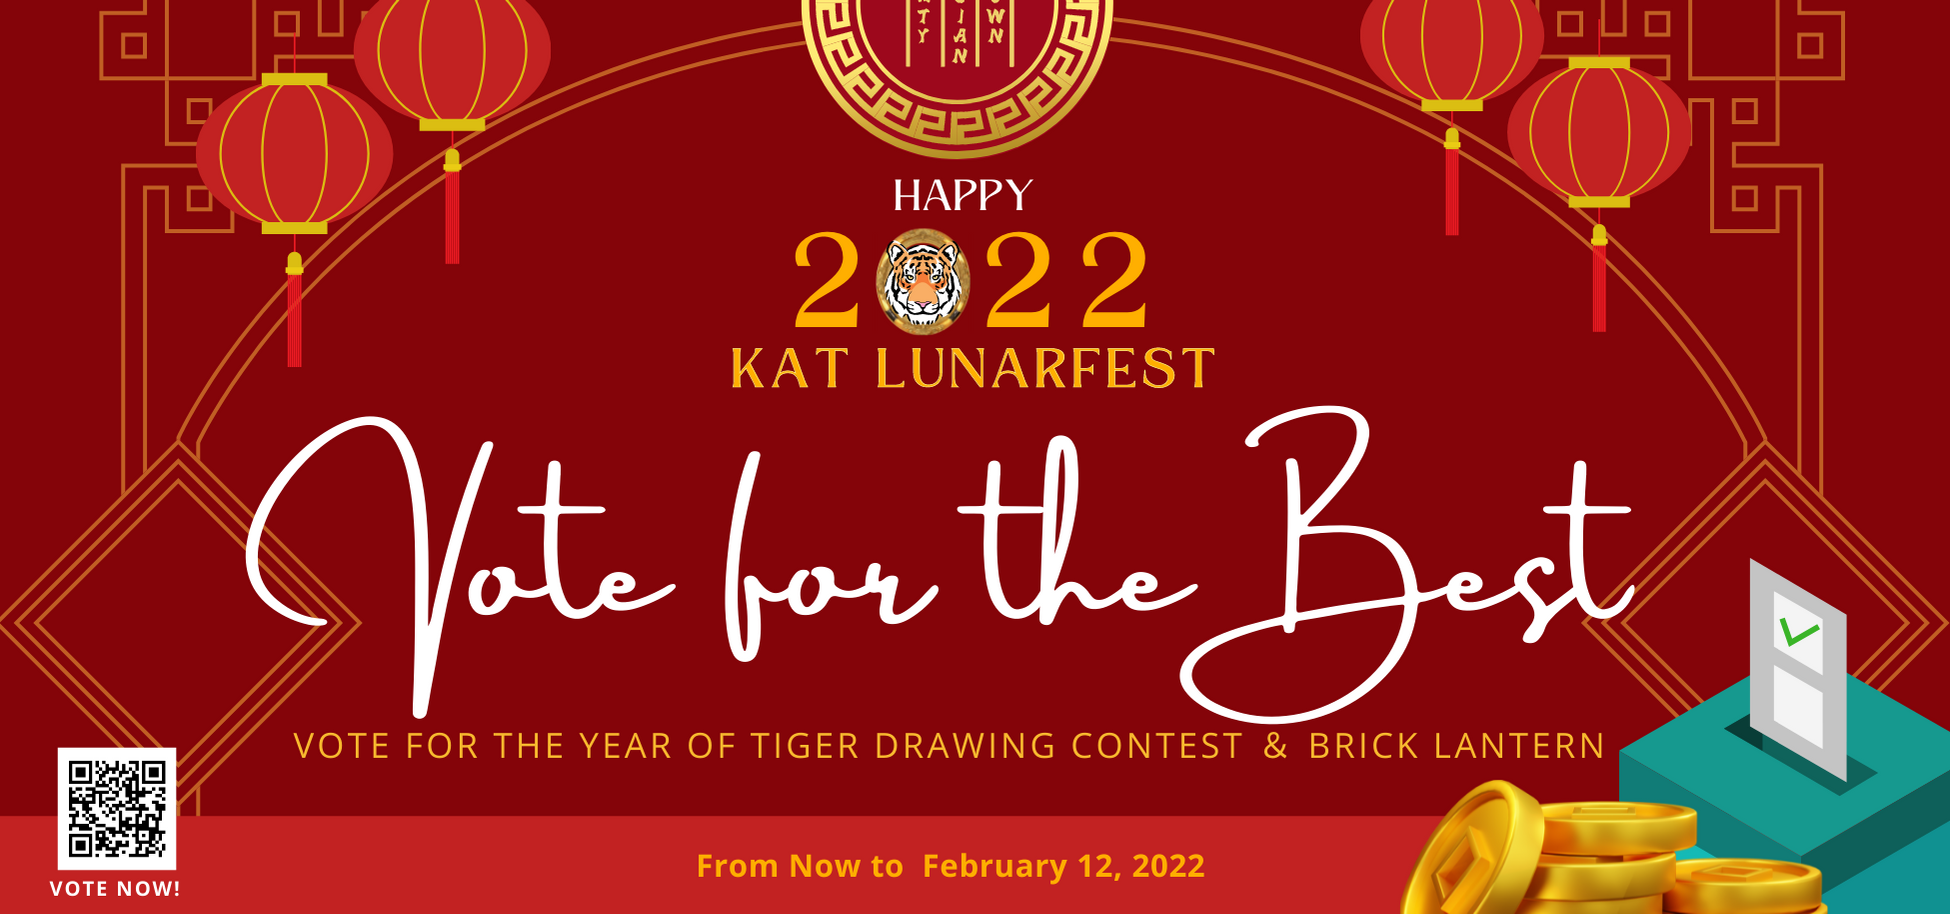 Year of Tiger Drawing contest voting